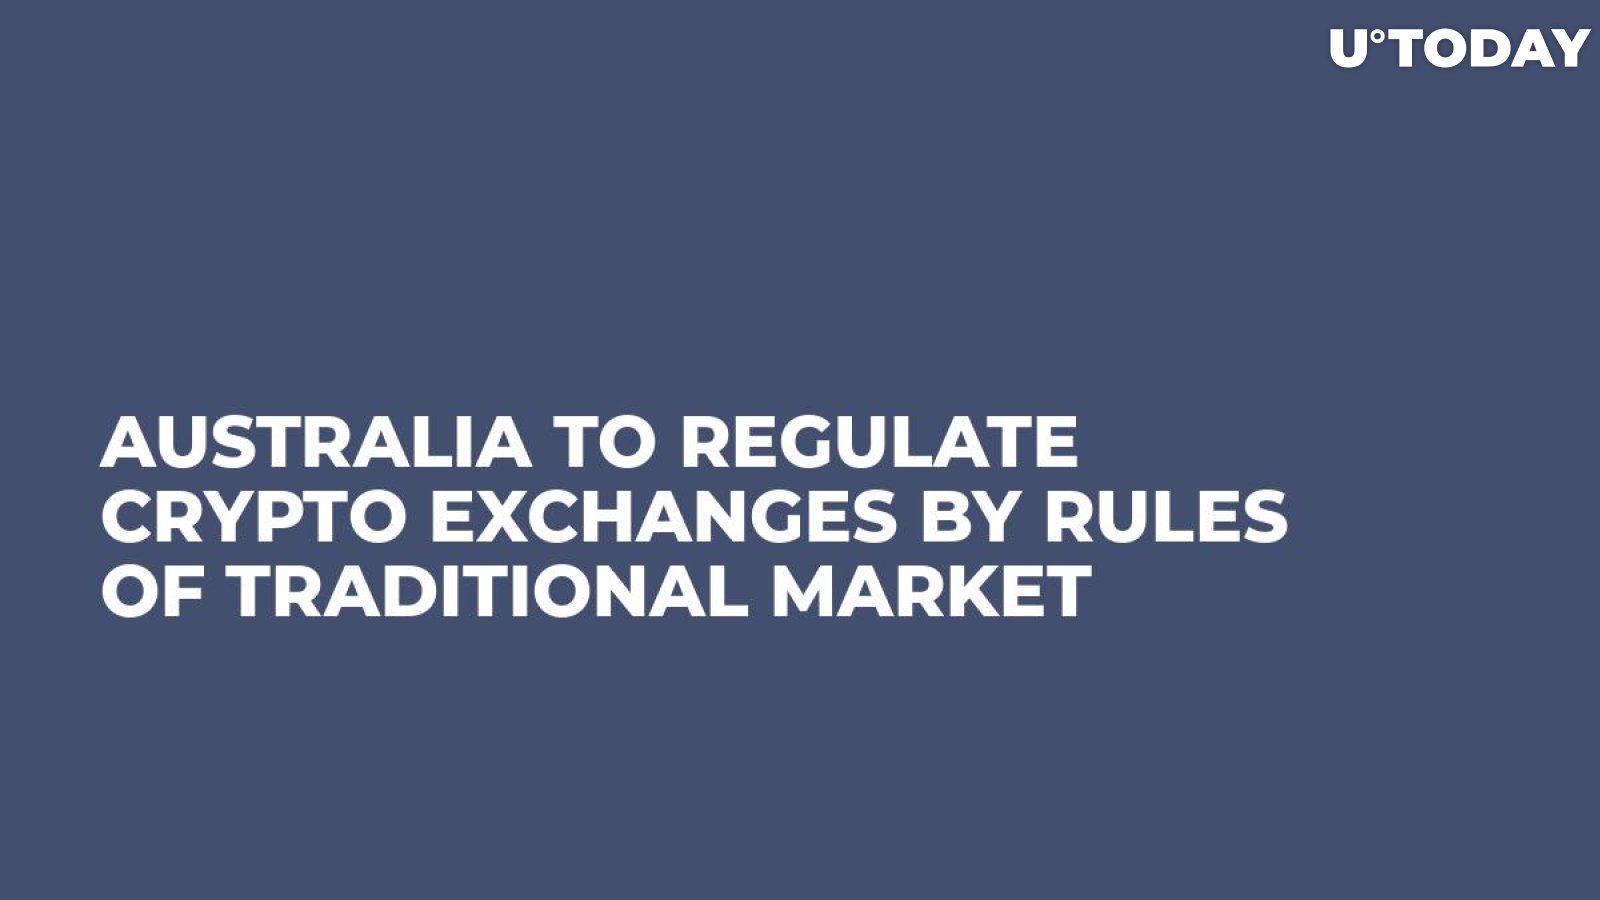 Australia to Regulate Crypto Exchanges By Rules of Traditional Market